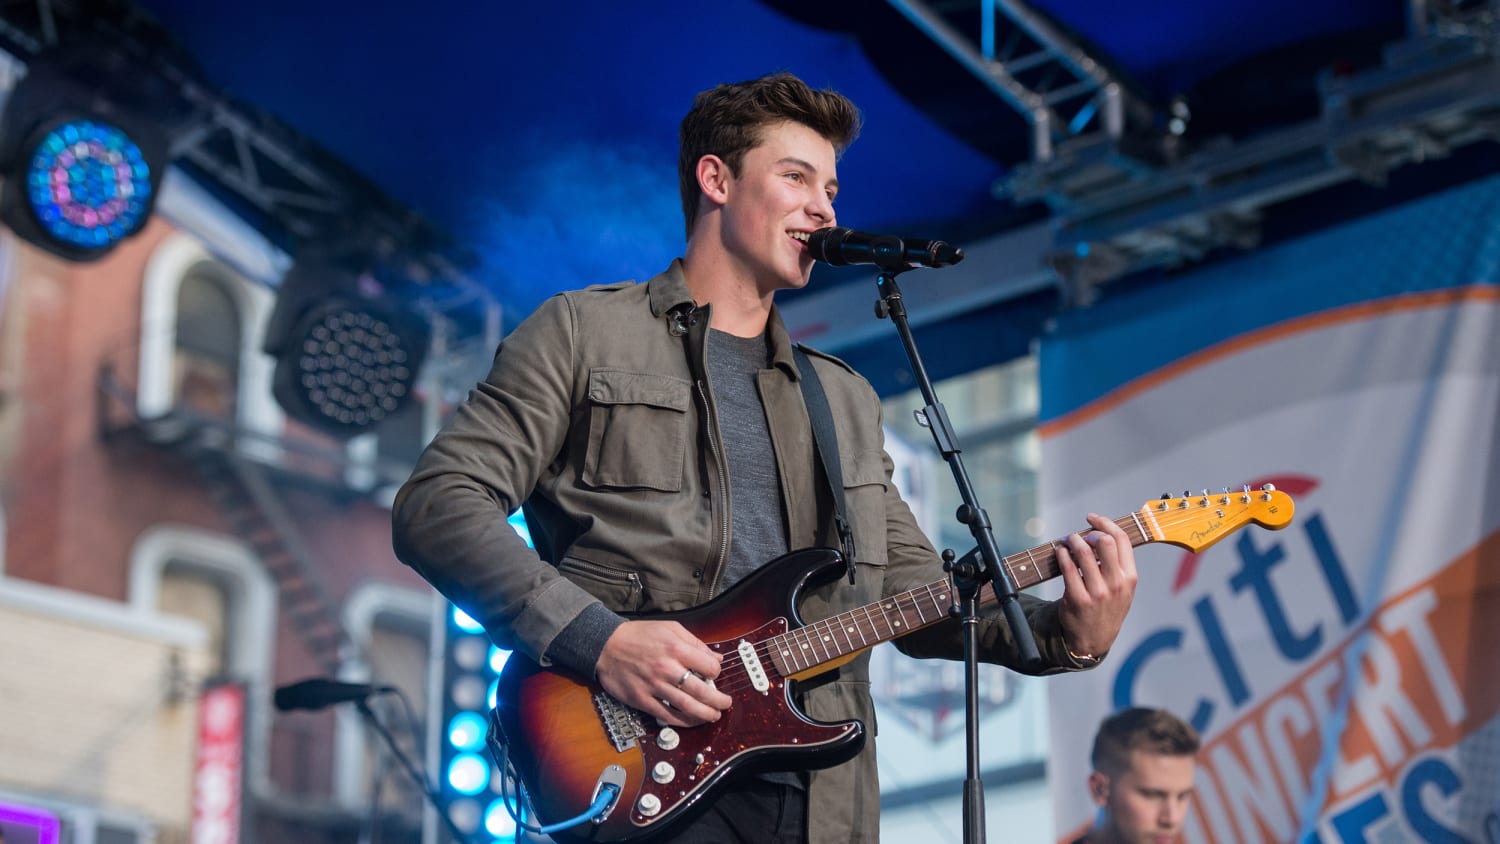 Shawn Mendes brings his hits to the TODAY plaza - TODAY.com